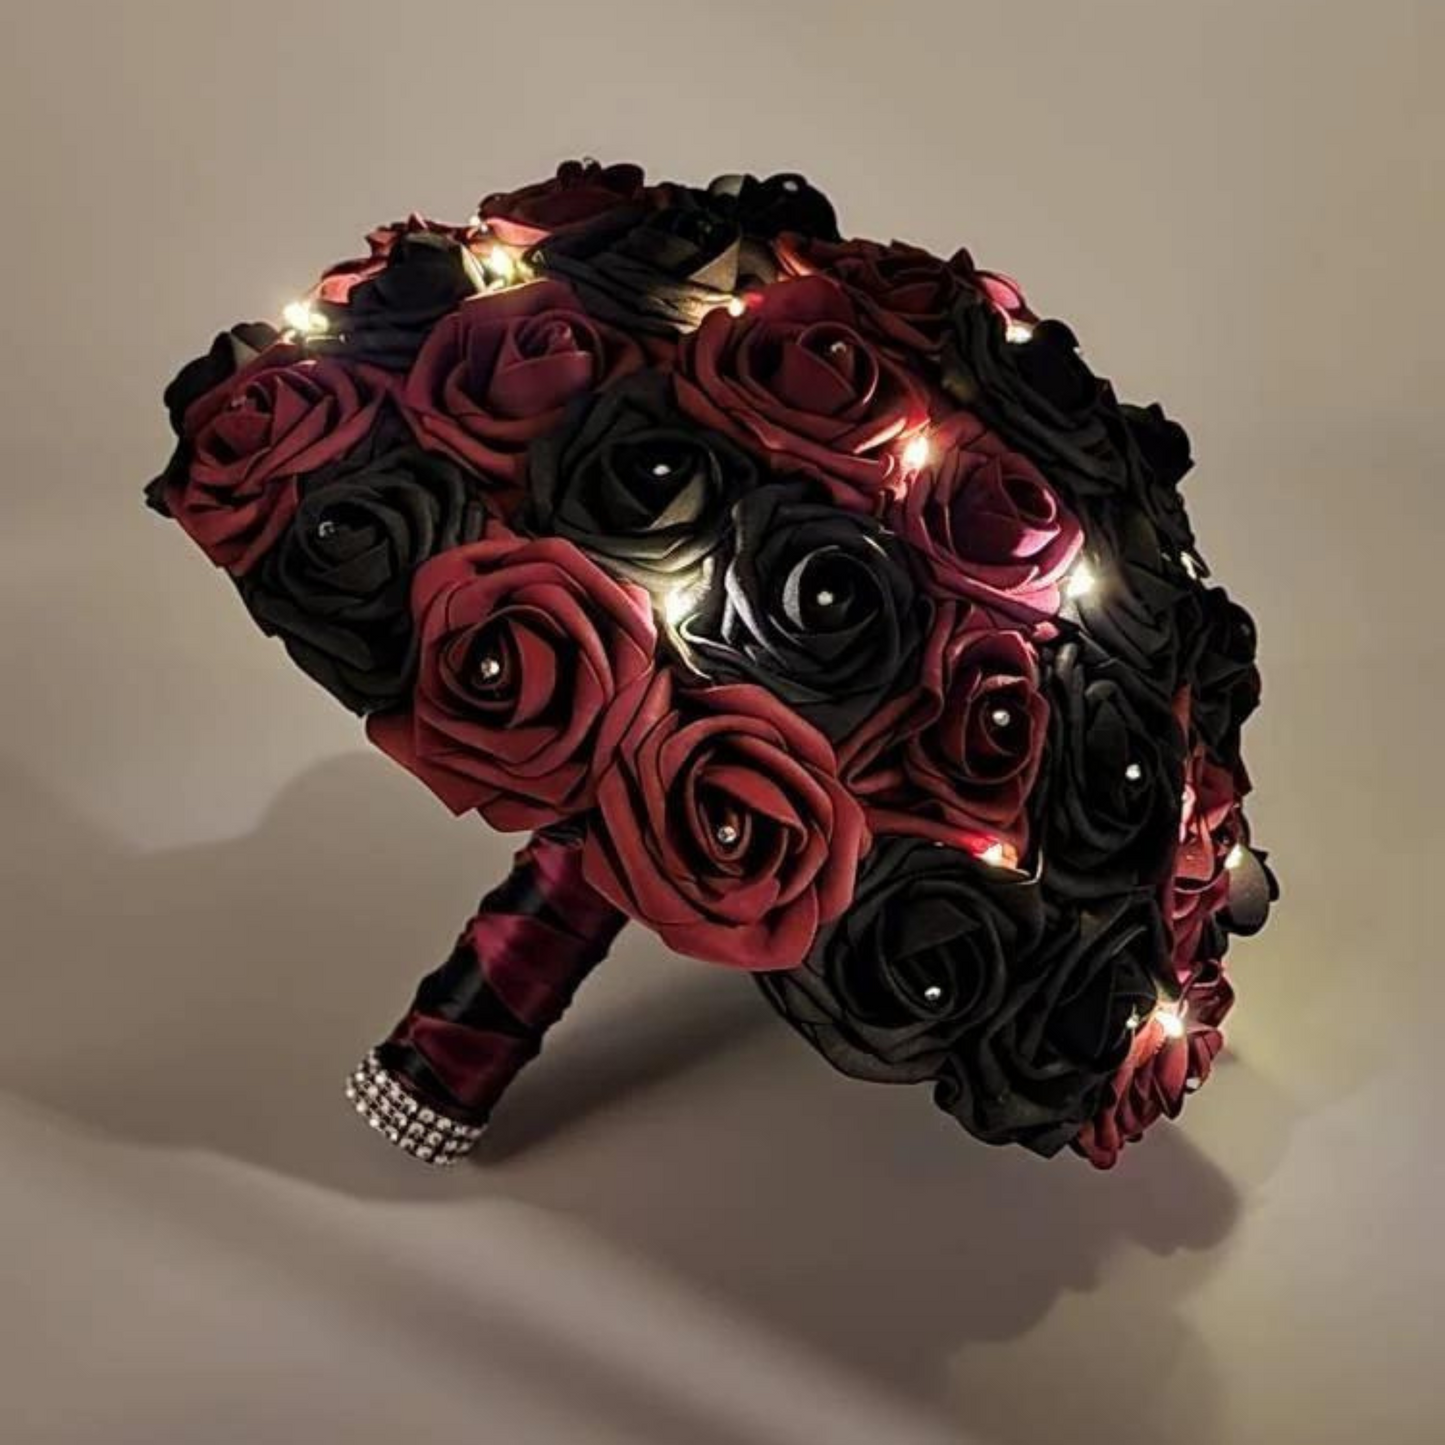 Fairy Lights Burgundy and black Bridal Bouquet